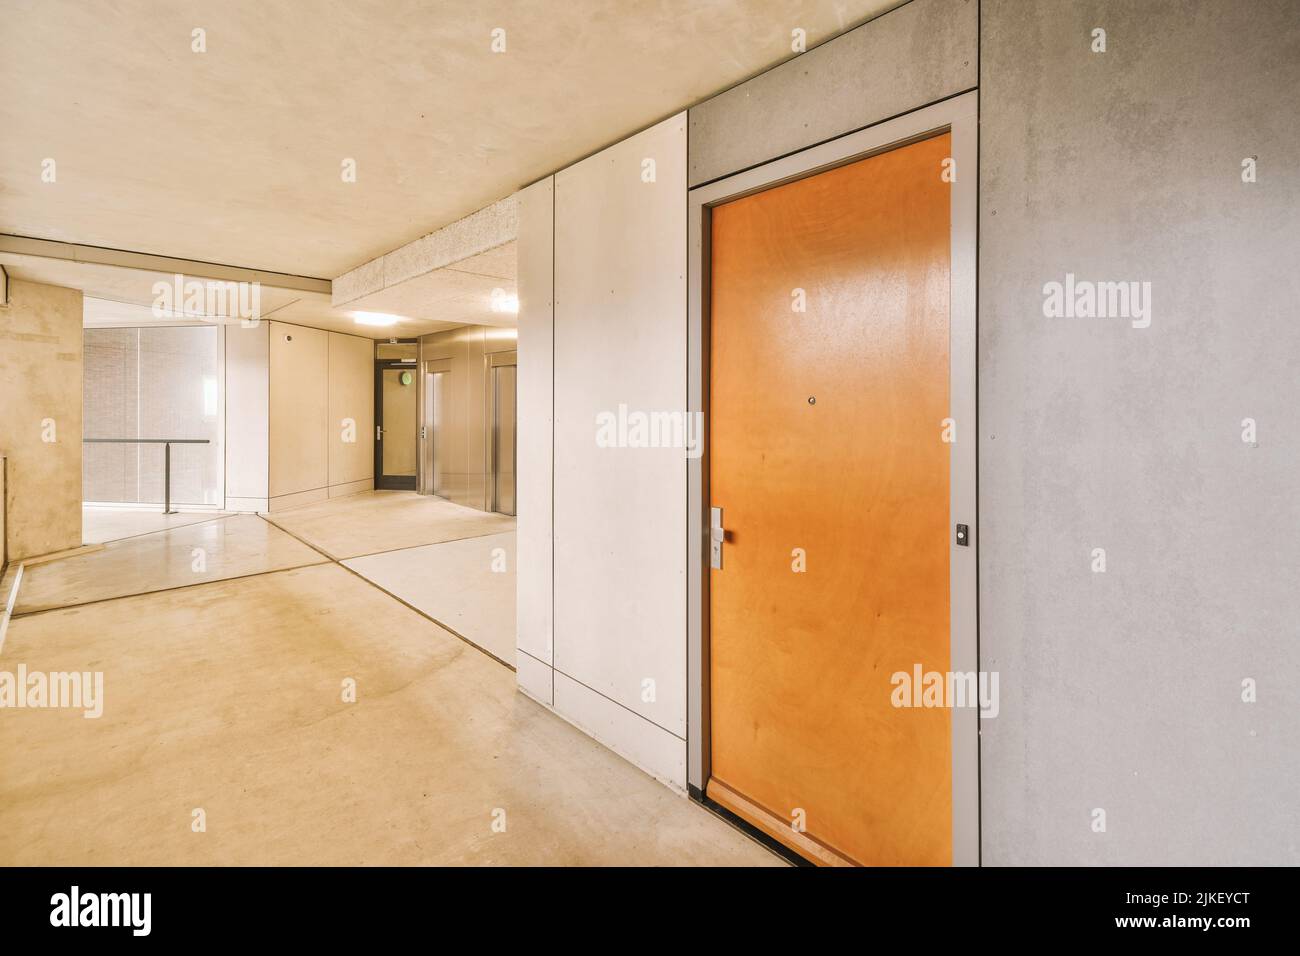 Shiny elevator in illuminated hall of contemporary apartment building with tiled floor Stock Photo